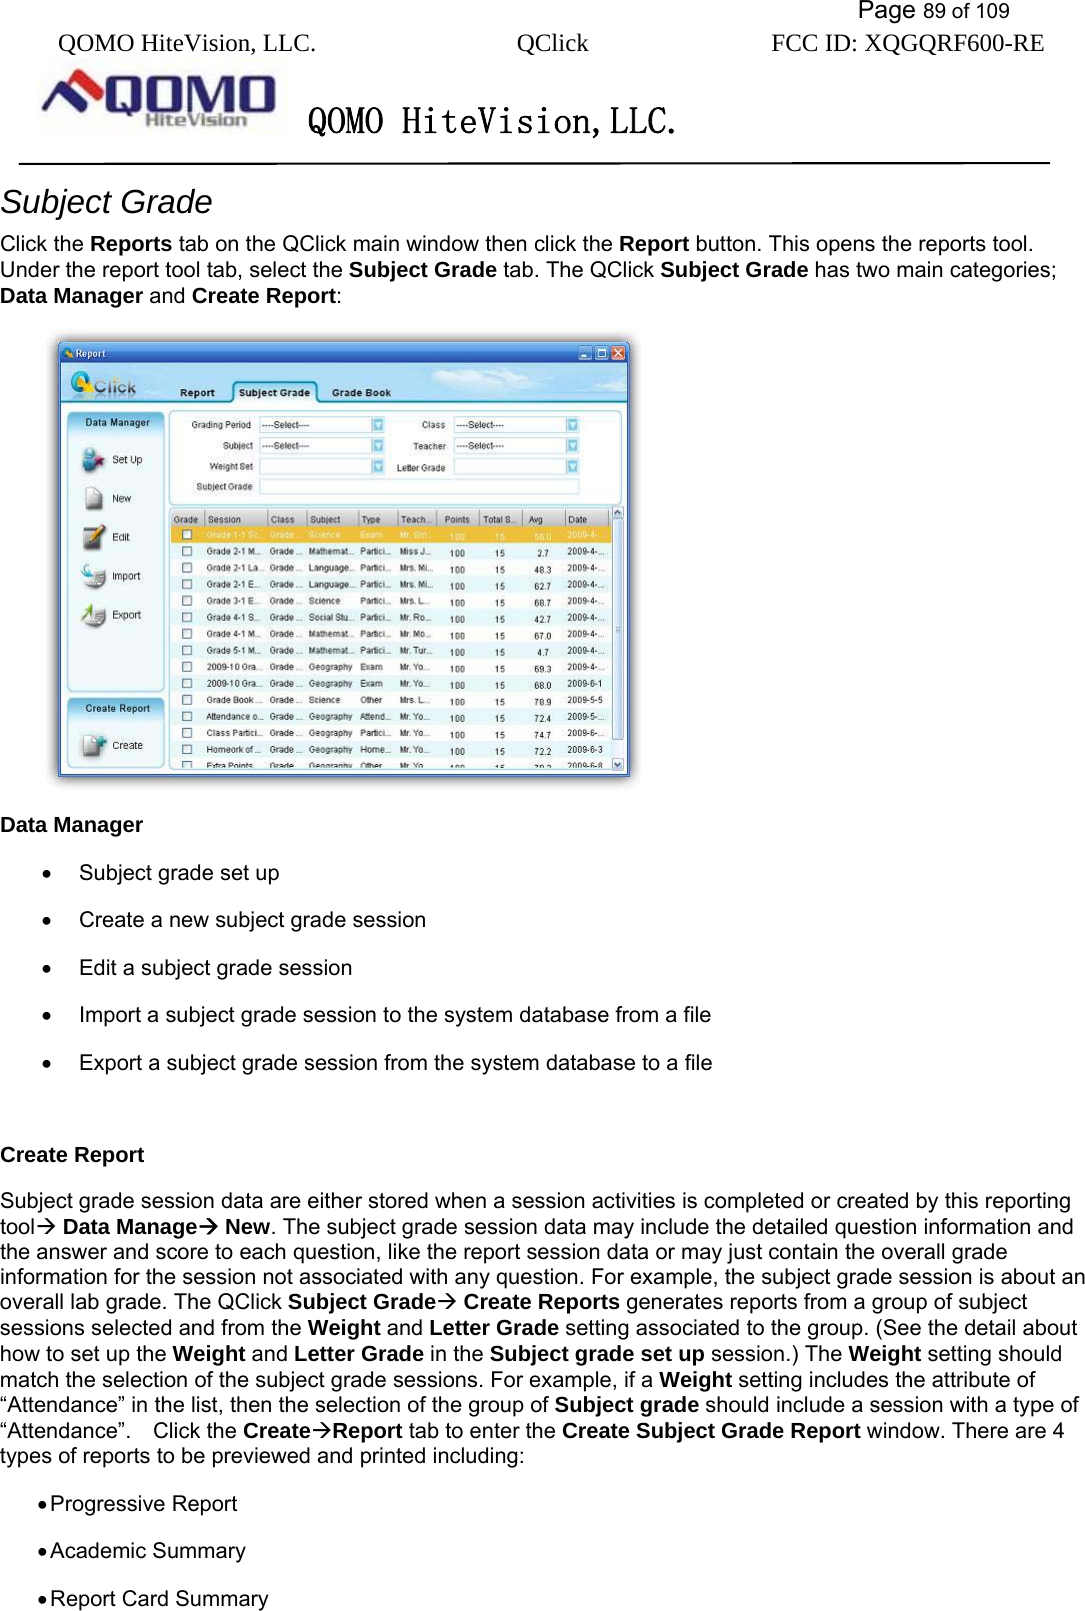           Page 89 of 109 QOMO HiteVision, LLC.  QClick        FCC ID: XQGQRF600-RE     QOMO HiteVision,LLC.   Subject Grade Click the Reports tab on the QClick main window then click the Report button. This opens the reports tool.   Under the report tool tab, select the Subject Grade tab. The QClick Subject Grade has two main categories; Data Manager and Create Report:  Data Manager •  Subject grade set up   •  Create a new subject grade session •  Edit a subject grade session •  Import a subject grade session to the system database from a file •  Export a subject grade session from the system database to a file  Create Report Subject grade session data are either stored when a session activities is completed or created by this reporting tool Data Manage New. The subject grade session data may include the detailed question information and the answer and score to each question, like the report session data or may just contain the overall grade information for the session not associated with any question. For example, the subject grade session is about an overall lab grade. The QClick Subject Grade Create Reports generates reports from a group of subject sessions selected and from the Weight and Letter Grade setting associated to the group. (See the detail about how to set up the Weight and Letter Grade in the Subject grade set up session.) The Weight setting should match the selection of the subject grade sessions. For example, if a Weight setting includes the attribute of “Attendance” in the list, then the selection of the group of Subject grade should include a session with a type of “Attendance”.  Click the CreateReport tab to enter the Create Subject Grade Report window. There are 4 types of reports to be previewed and printed including: • Progressive Report • Academic Summary • Report Card Summary 